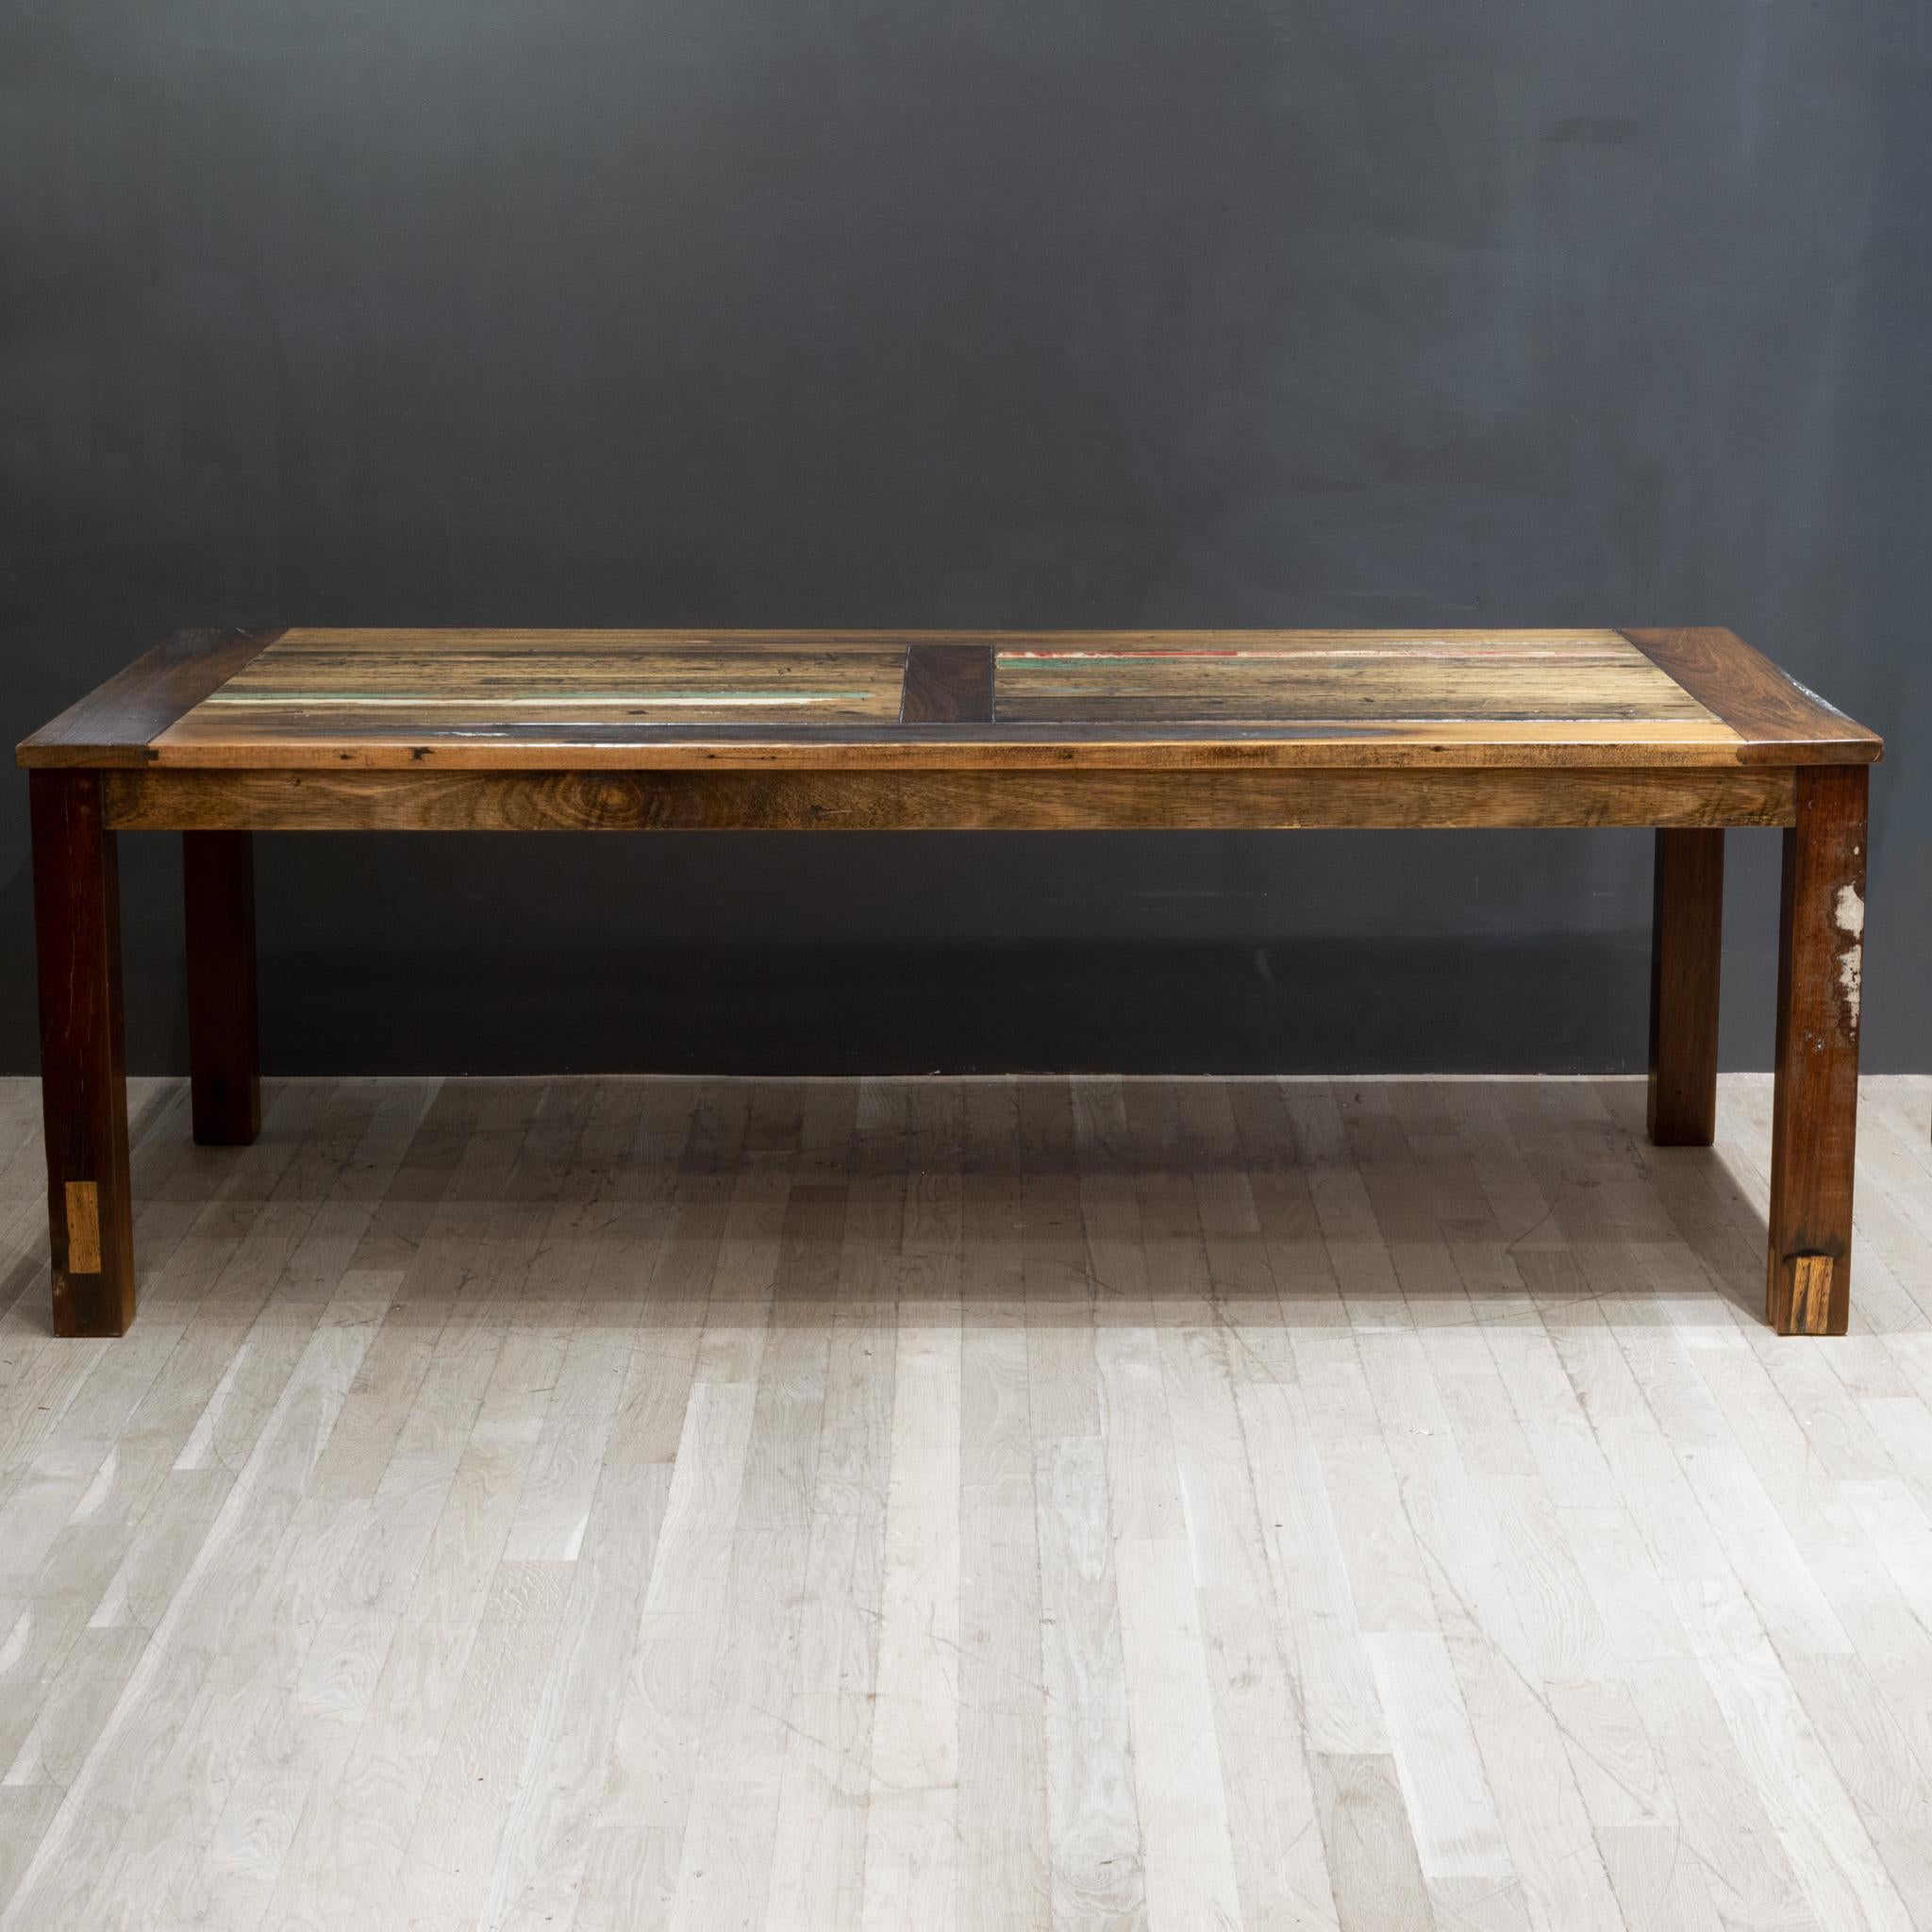 Hand-Crafted Large Reclaimed Australian Hardwood Dining Table For Sale